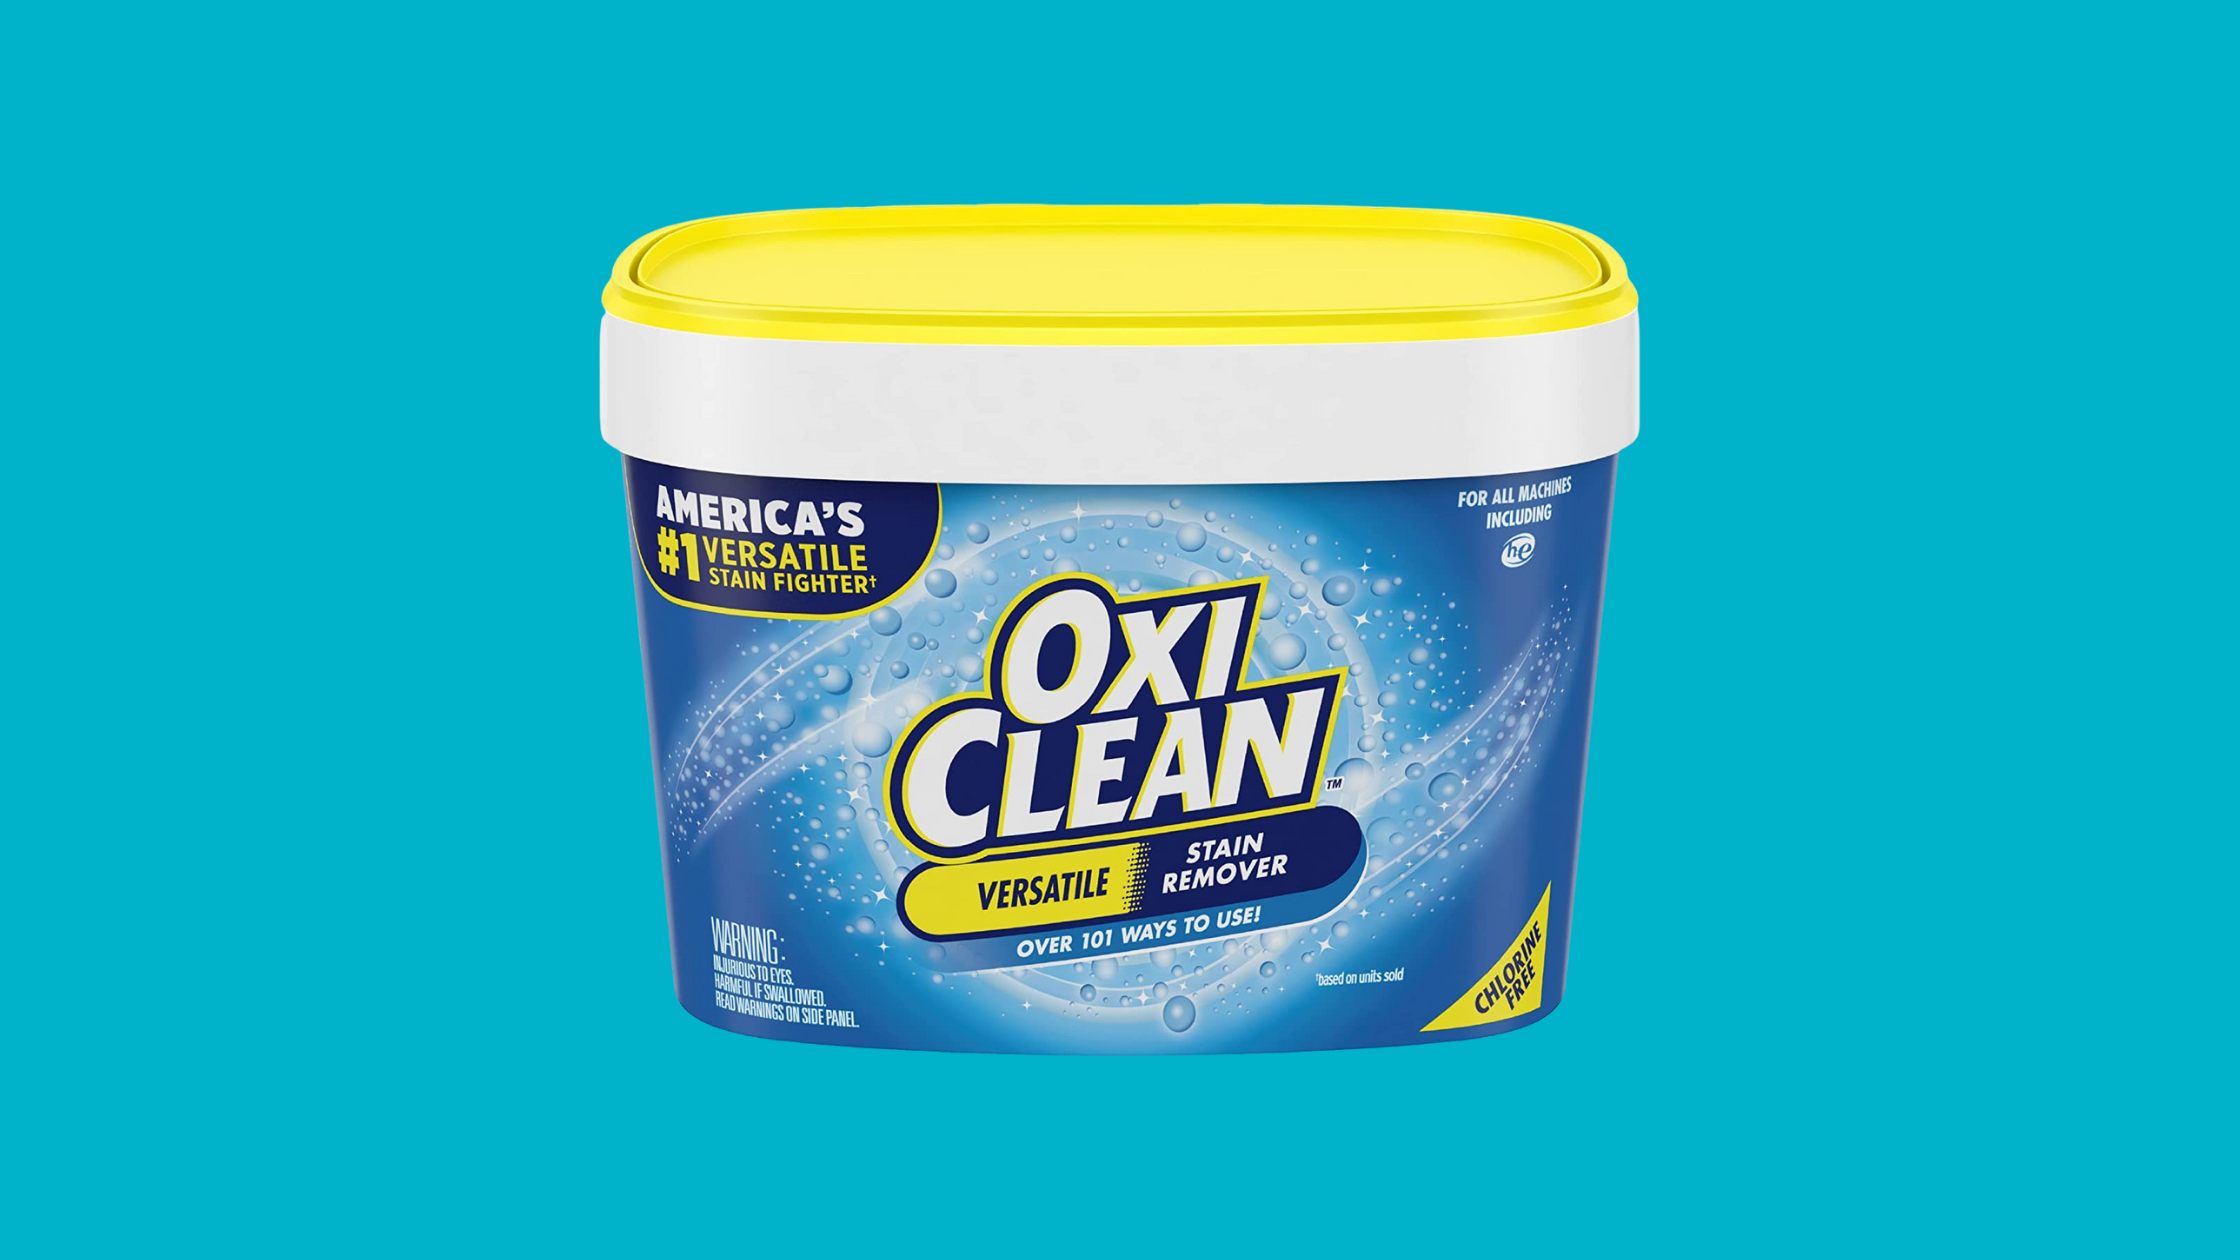 Oxiclean Stain Remover